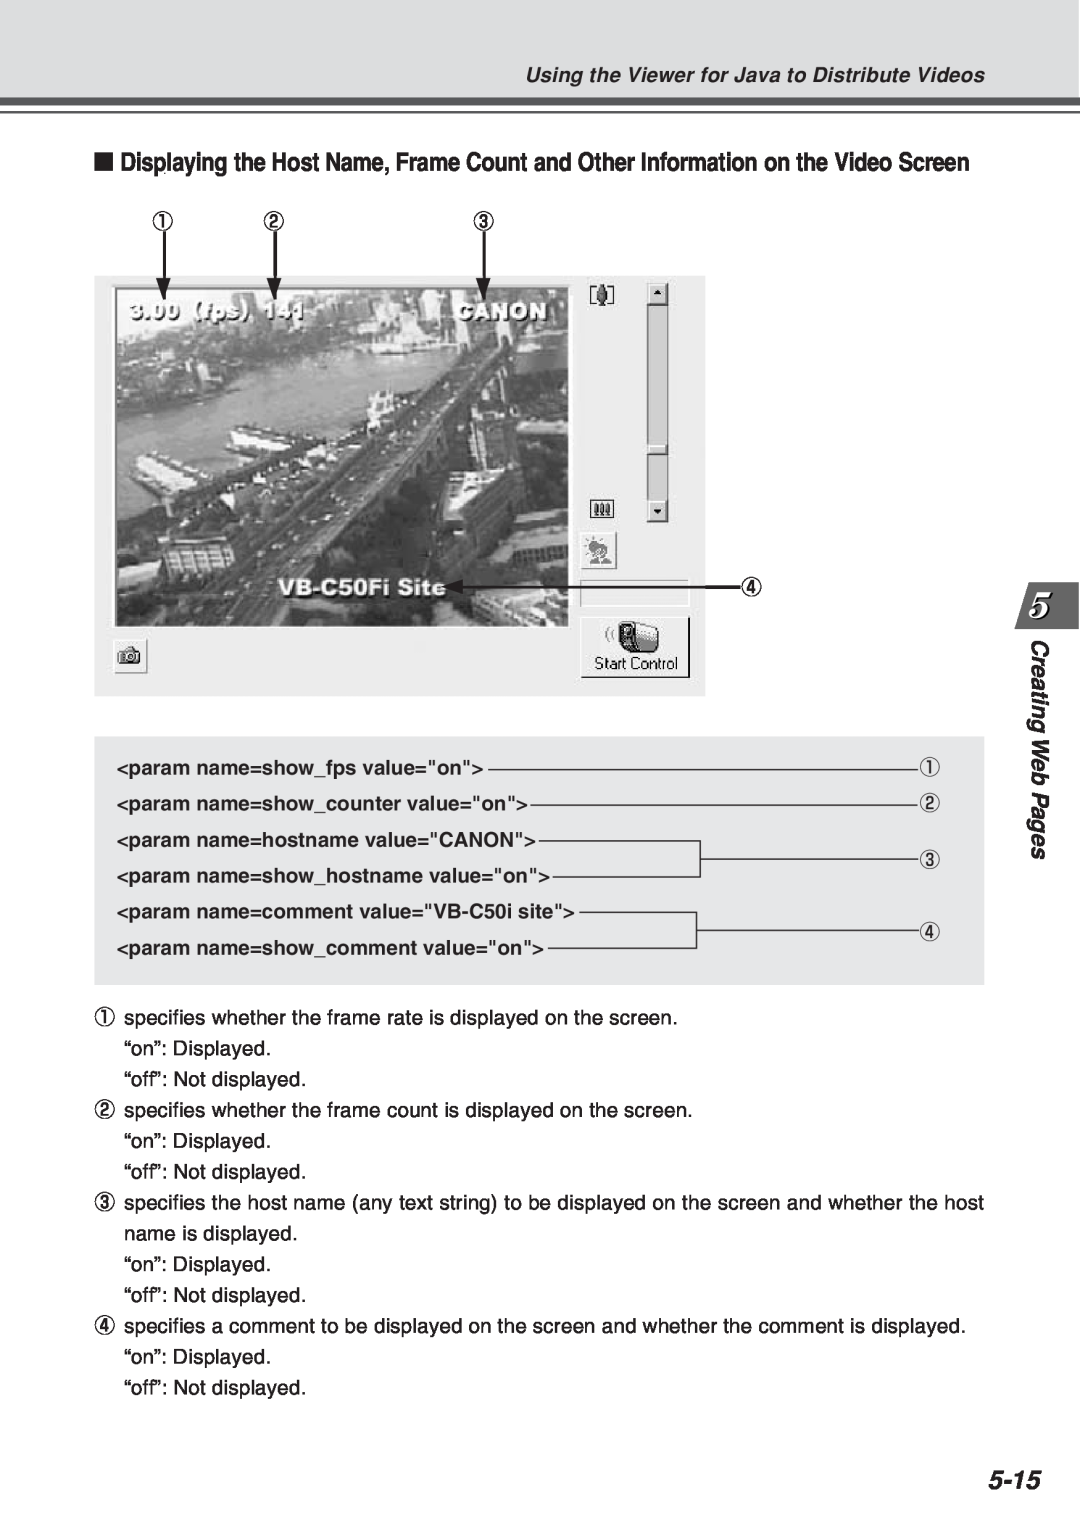 Canon Vb-C50fi user manual 5-15, Creating Web Pages, Using the Viewer for Java to Distribute Videos, “off” Not displayed 